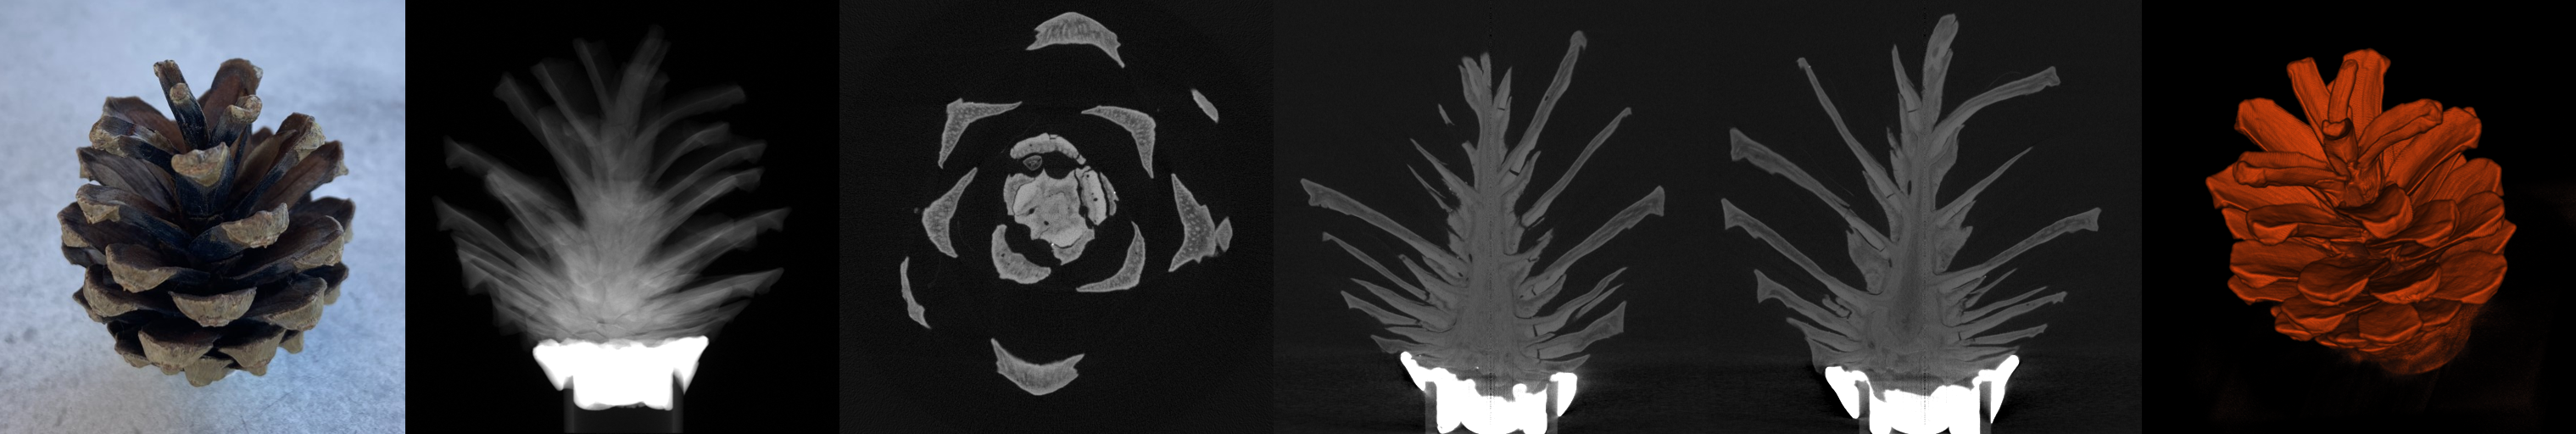 A collage of a photograph and CBCT images of the pine cone